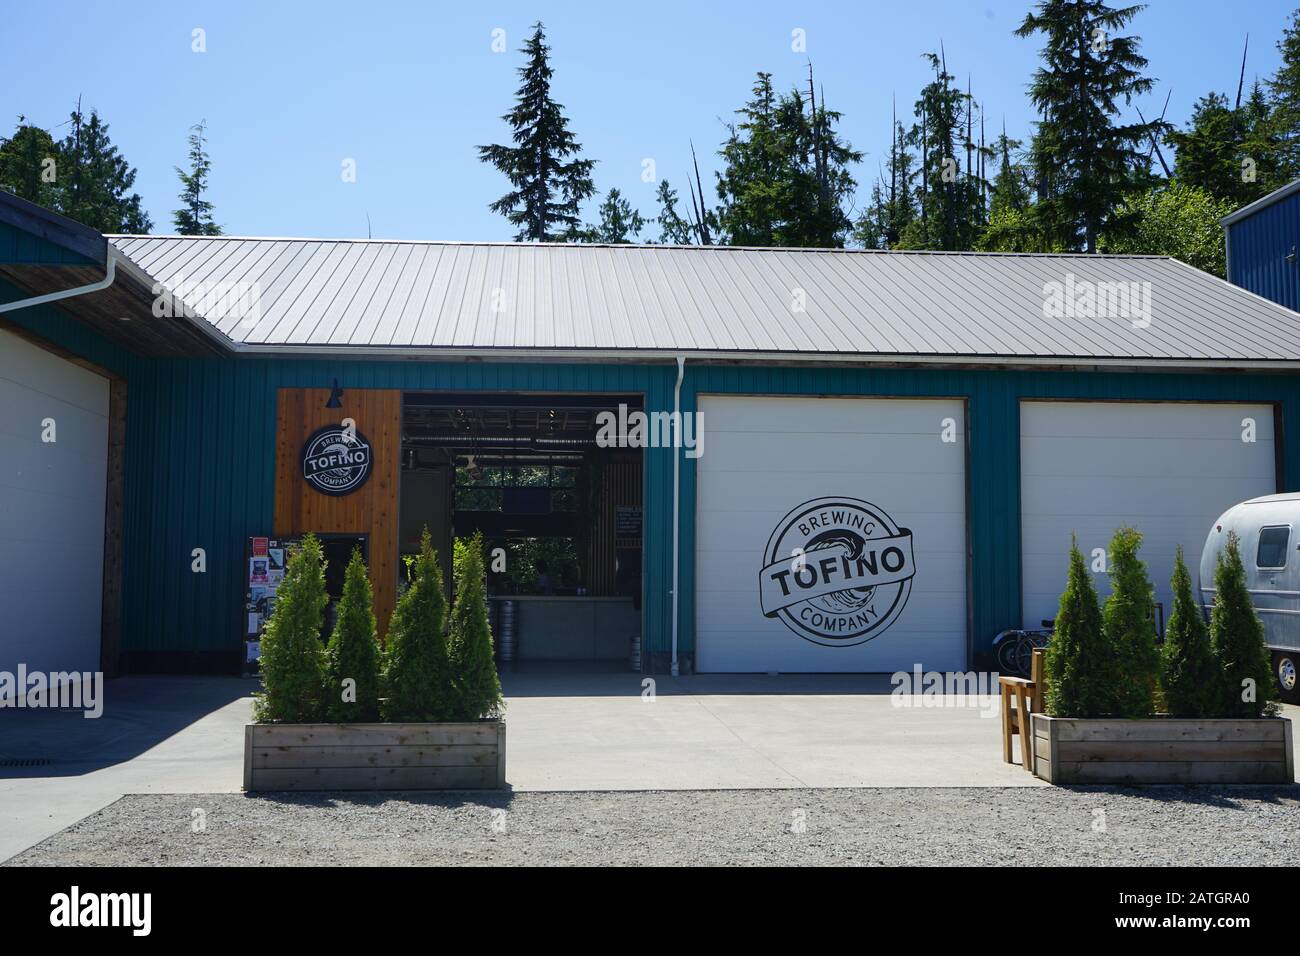 Tofino Browing Co, great place to stop in Tofino to drink good beers and have fun with friend, Tofino, Vancouver Island, British Columbia, Canada Stock Photo